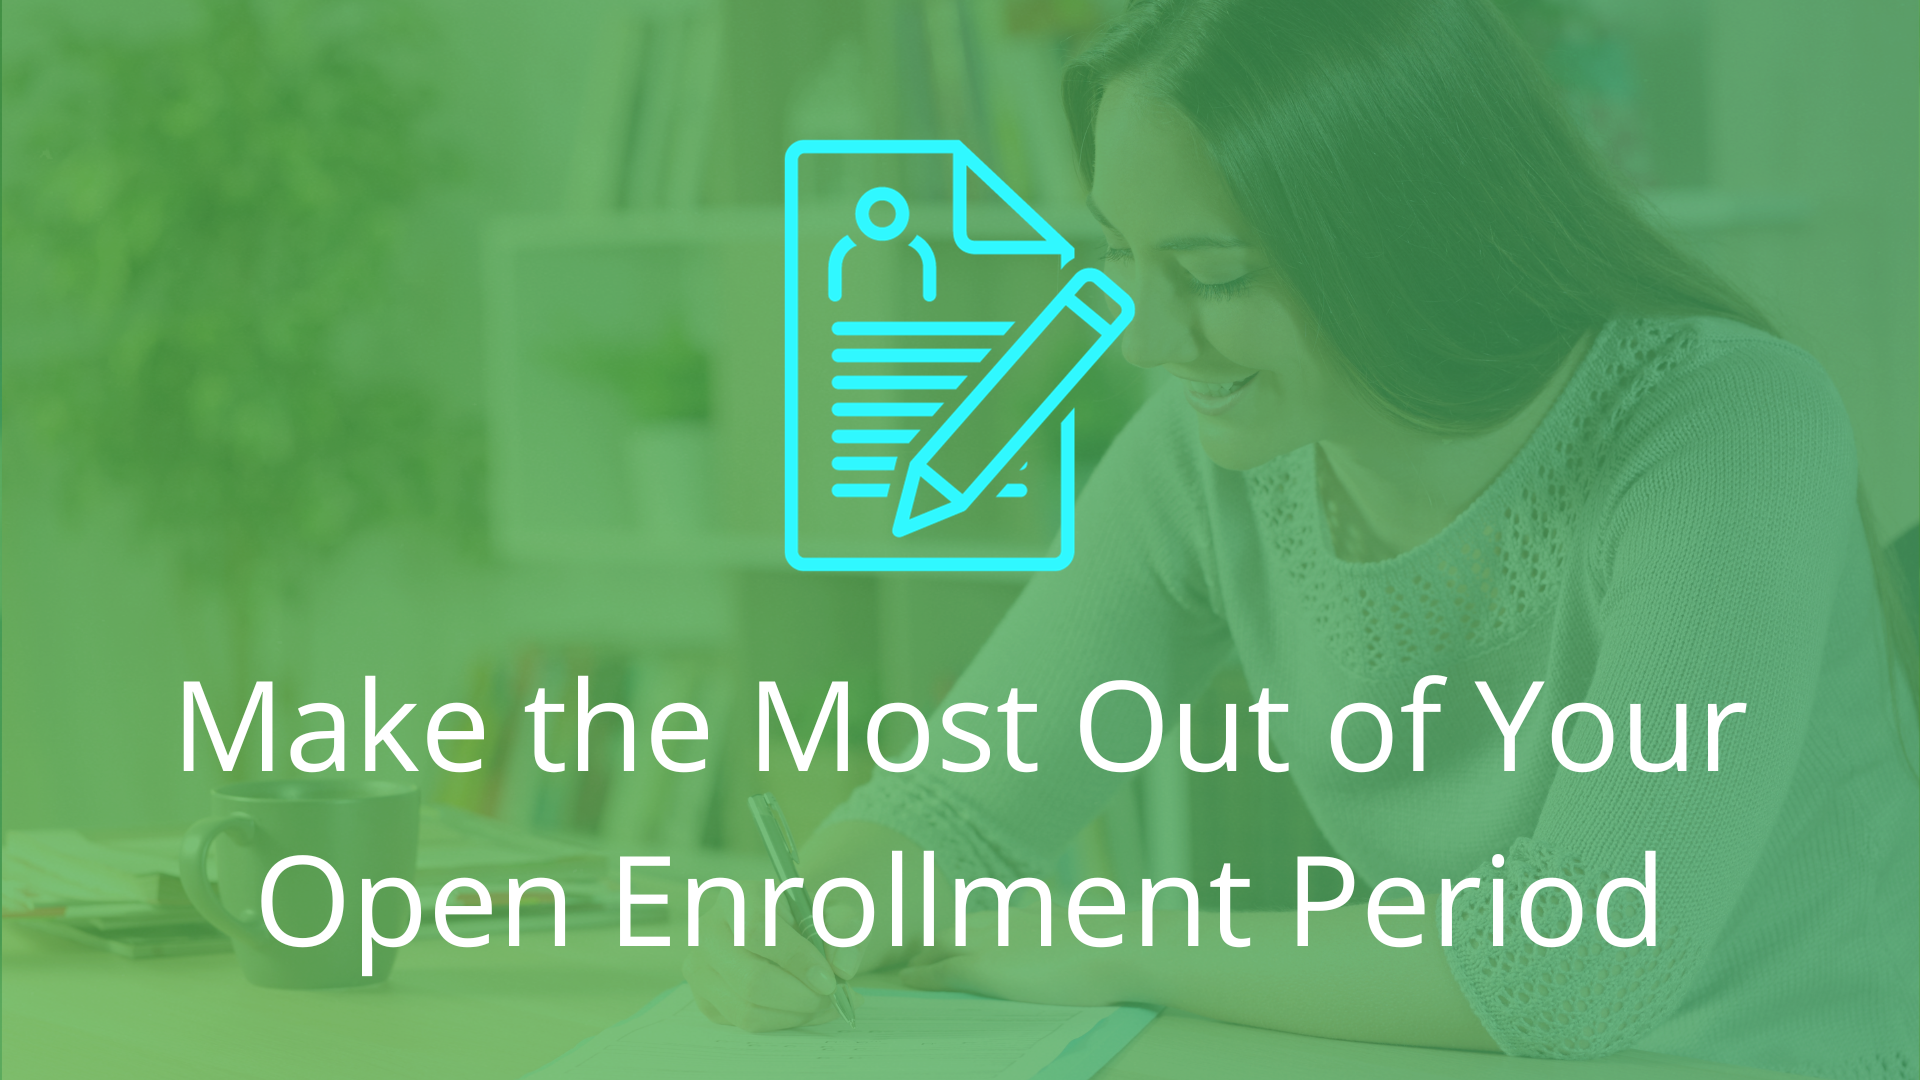 Make the most out of your open enrollment period